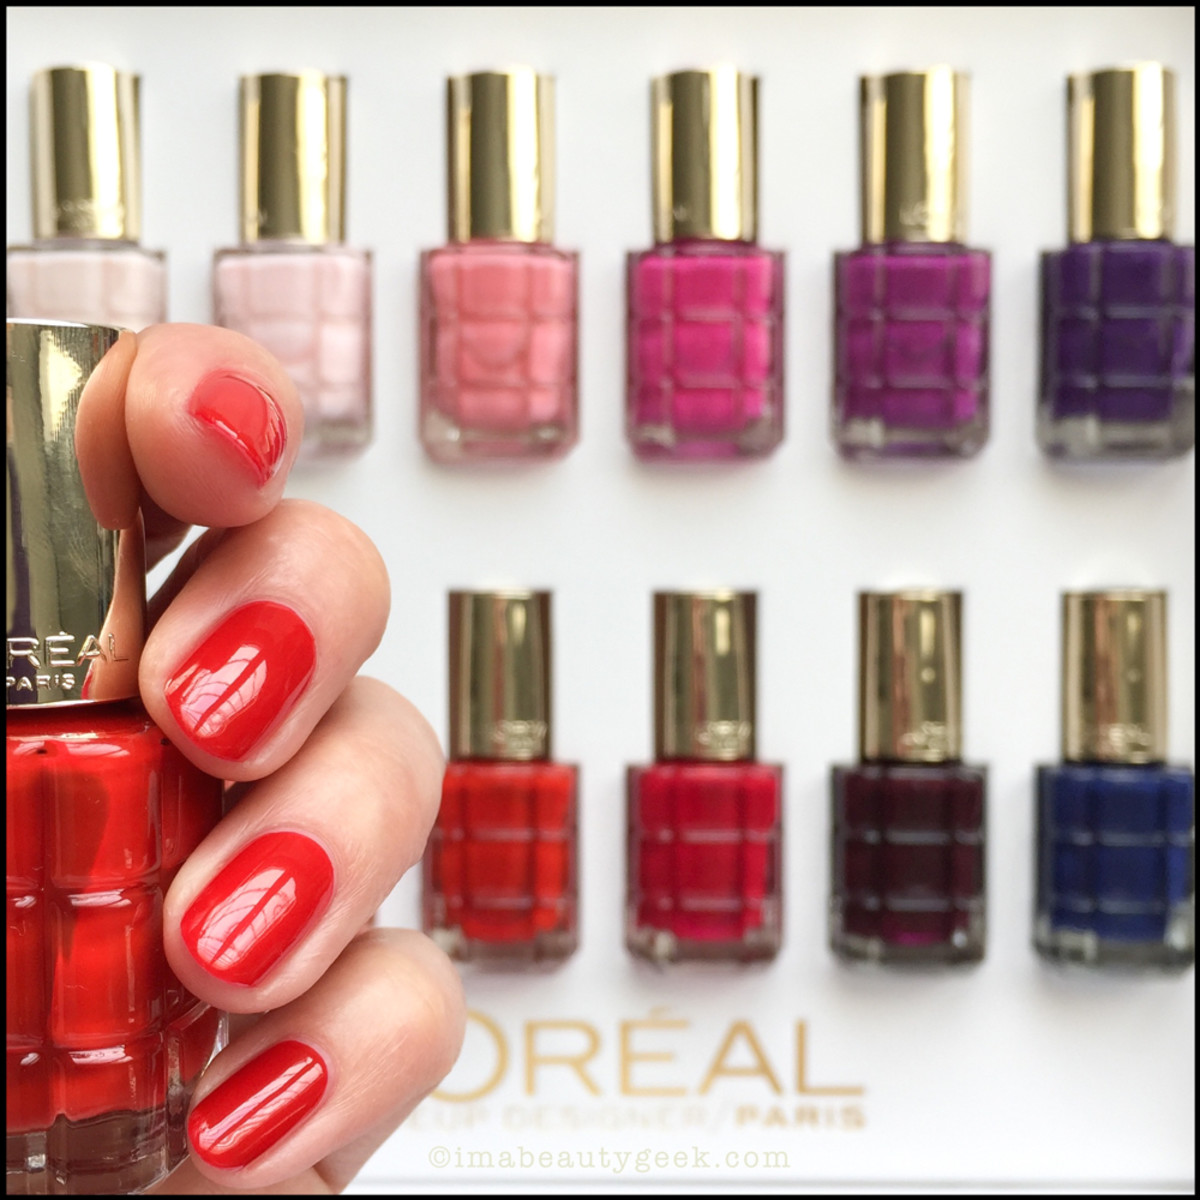 L'OREAL VERNIS A L'HUILE SWATCHES & REVIEW - Beautygeeks